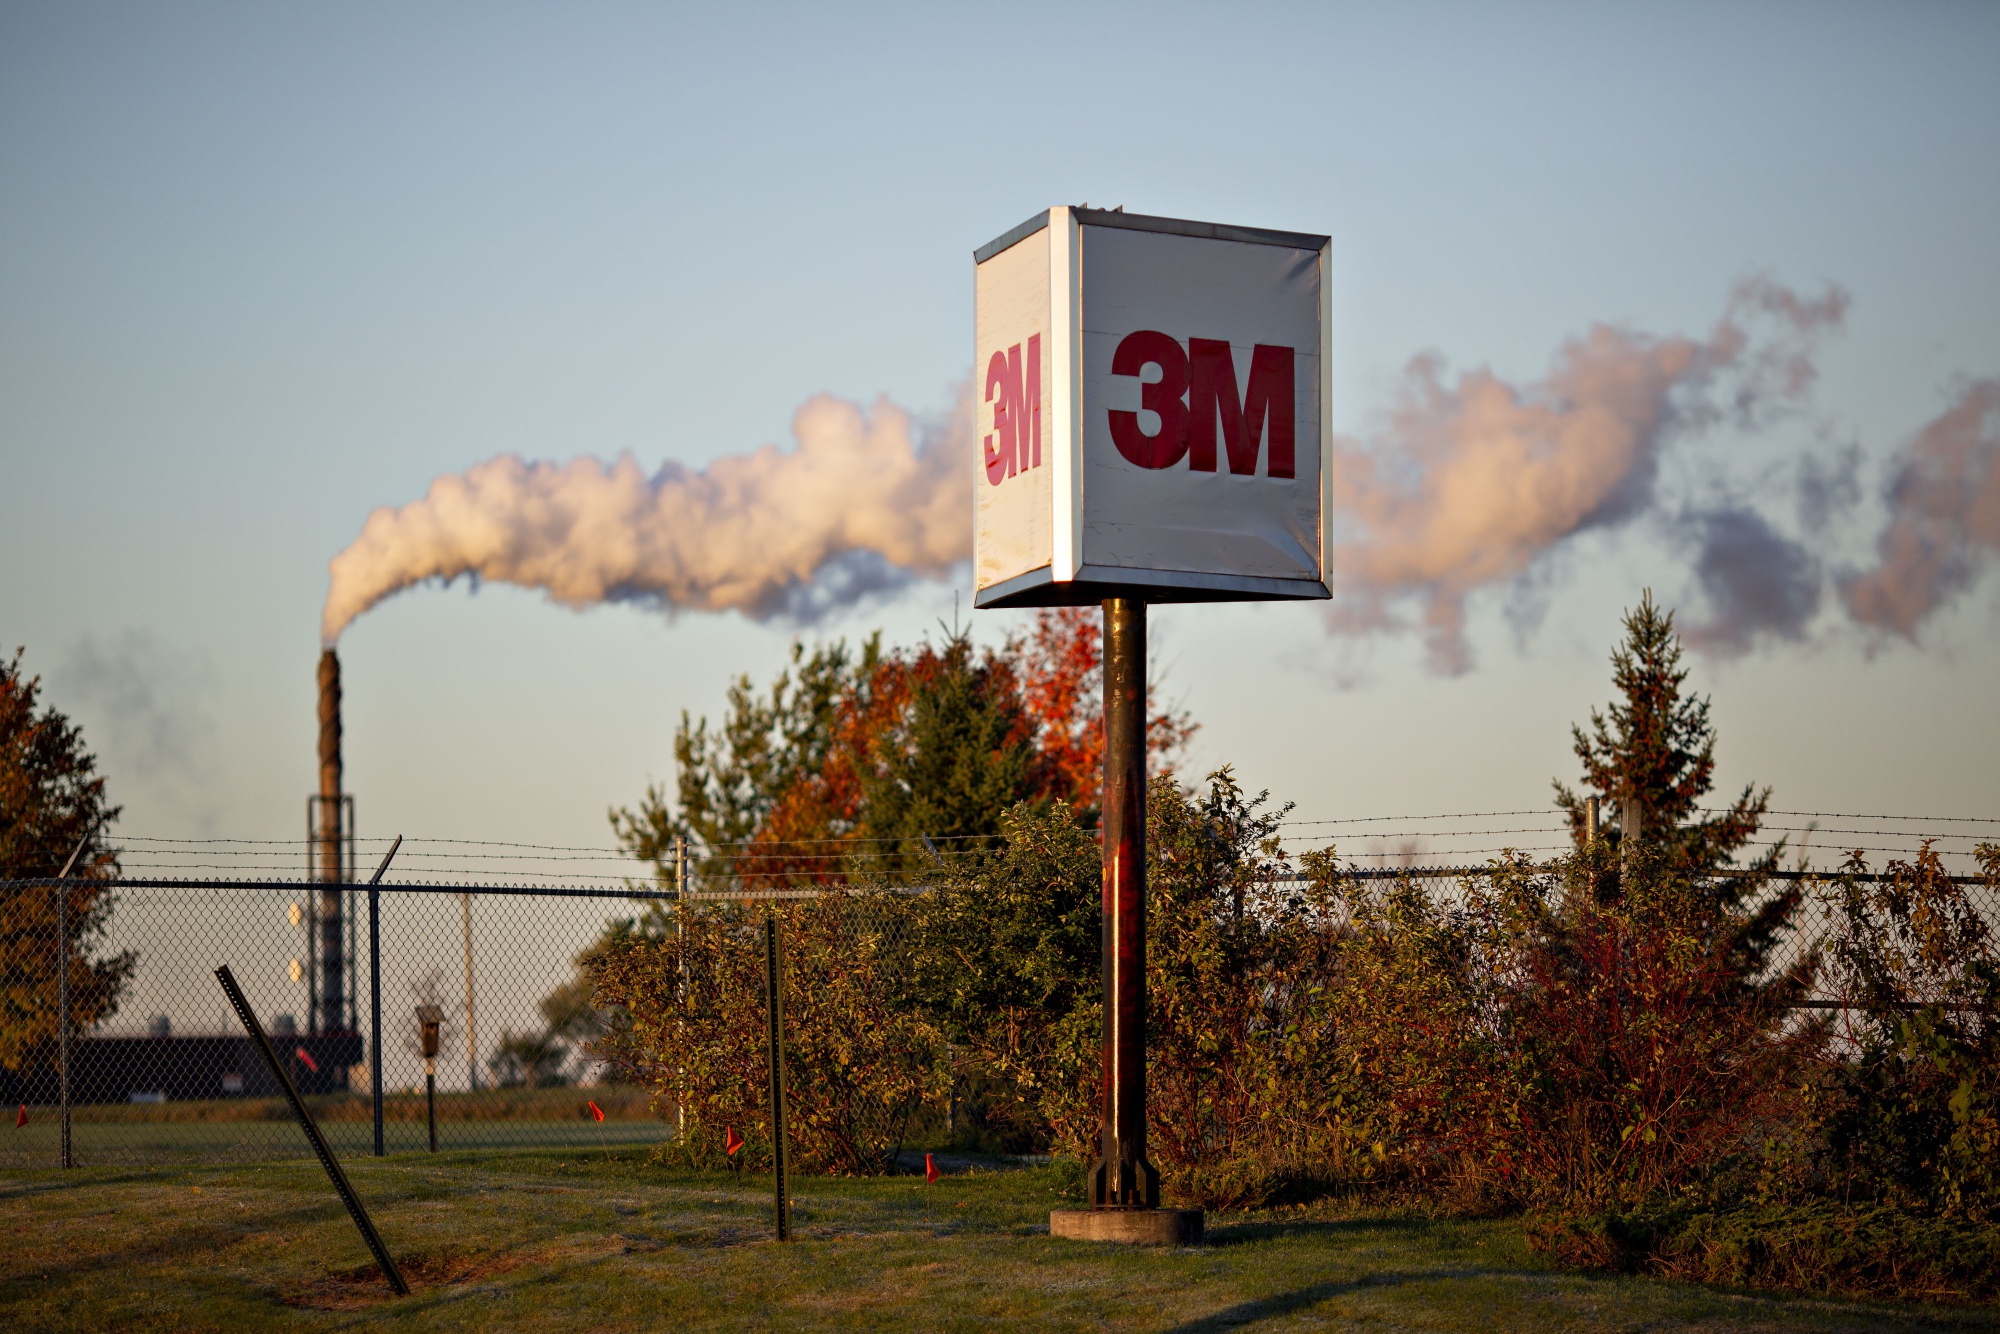 Lawsuits Charge That 3M Knew About the Dangers of PFCs